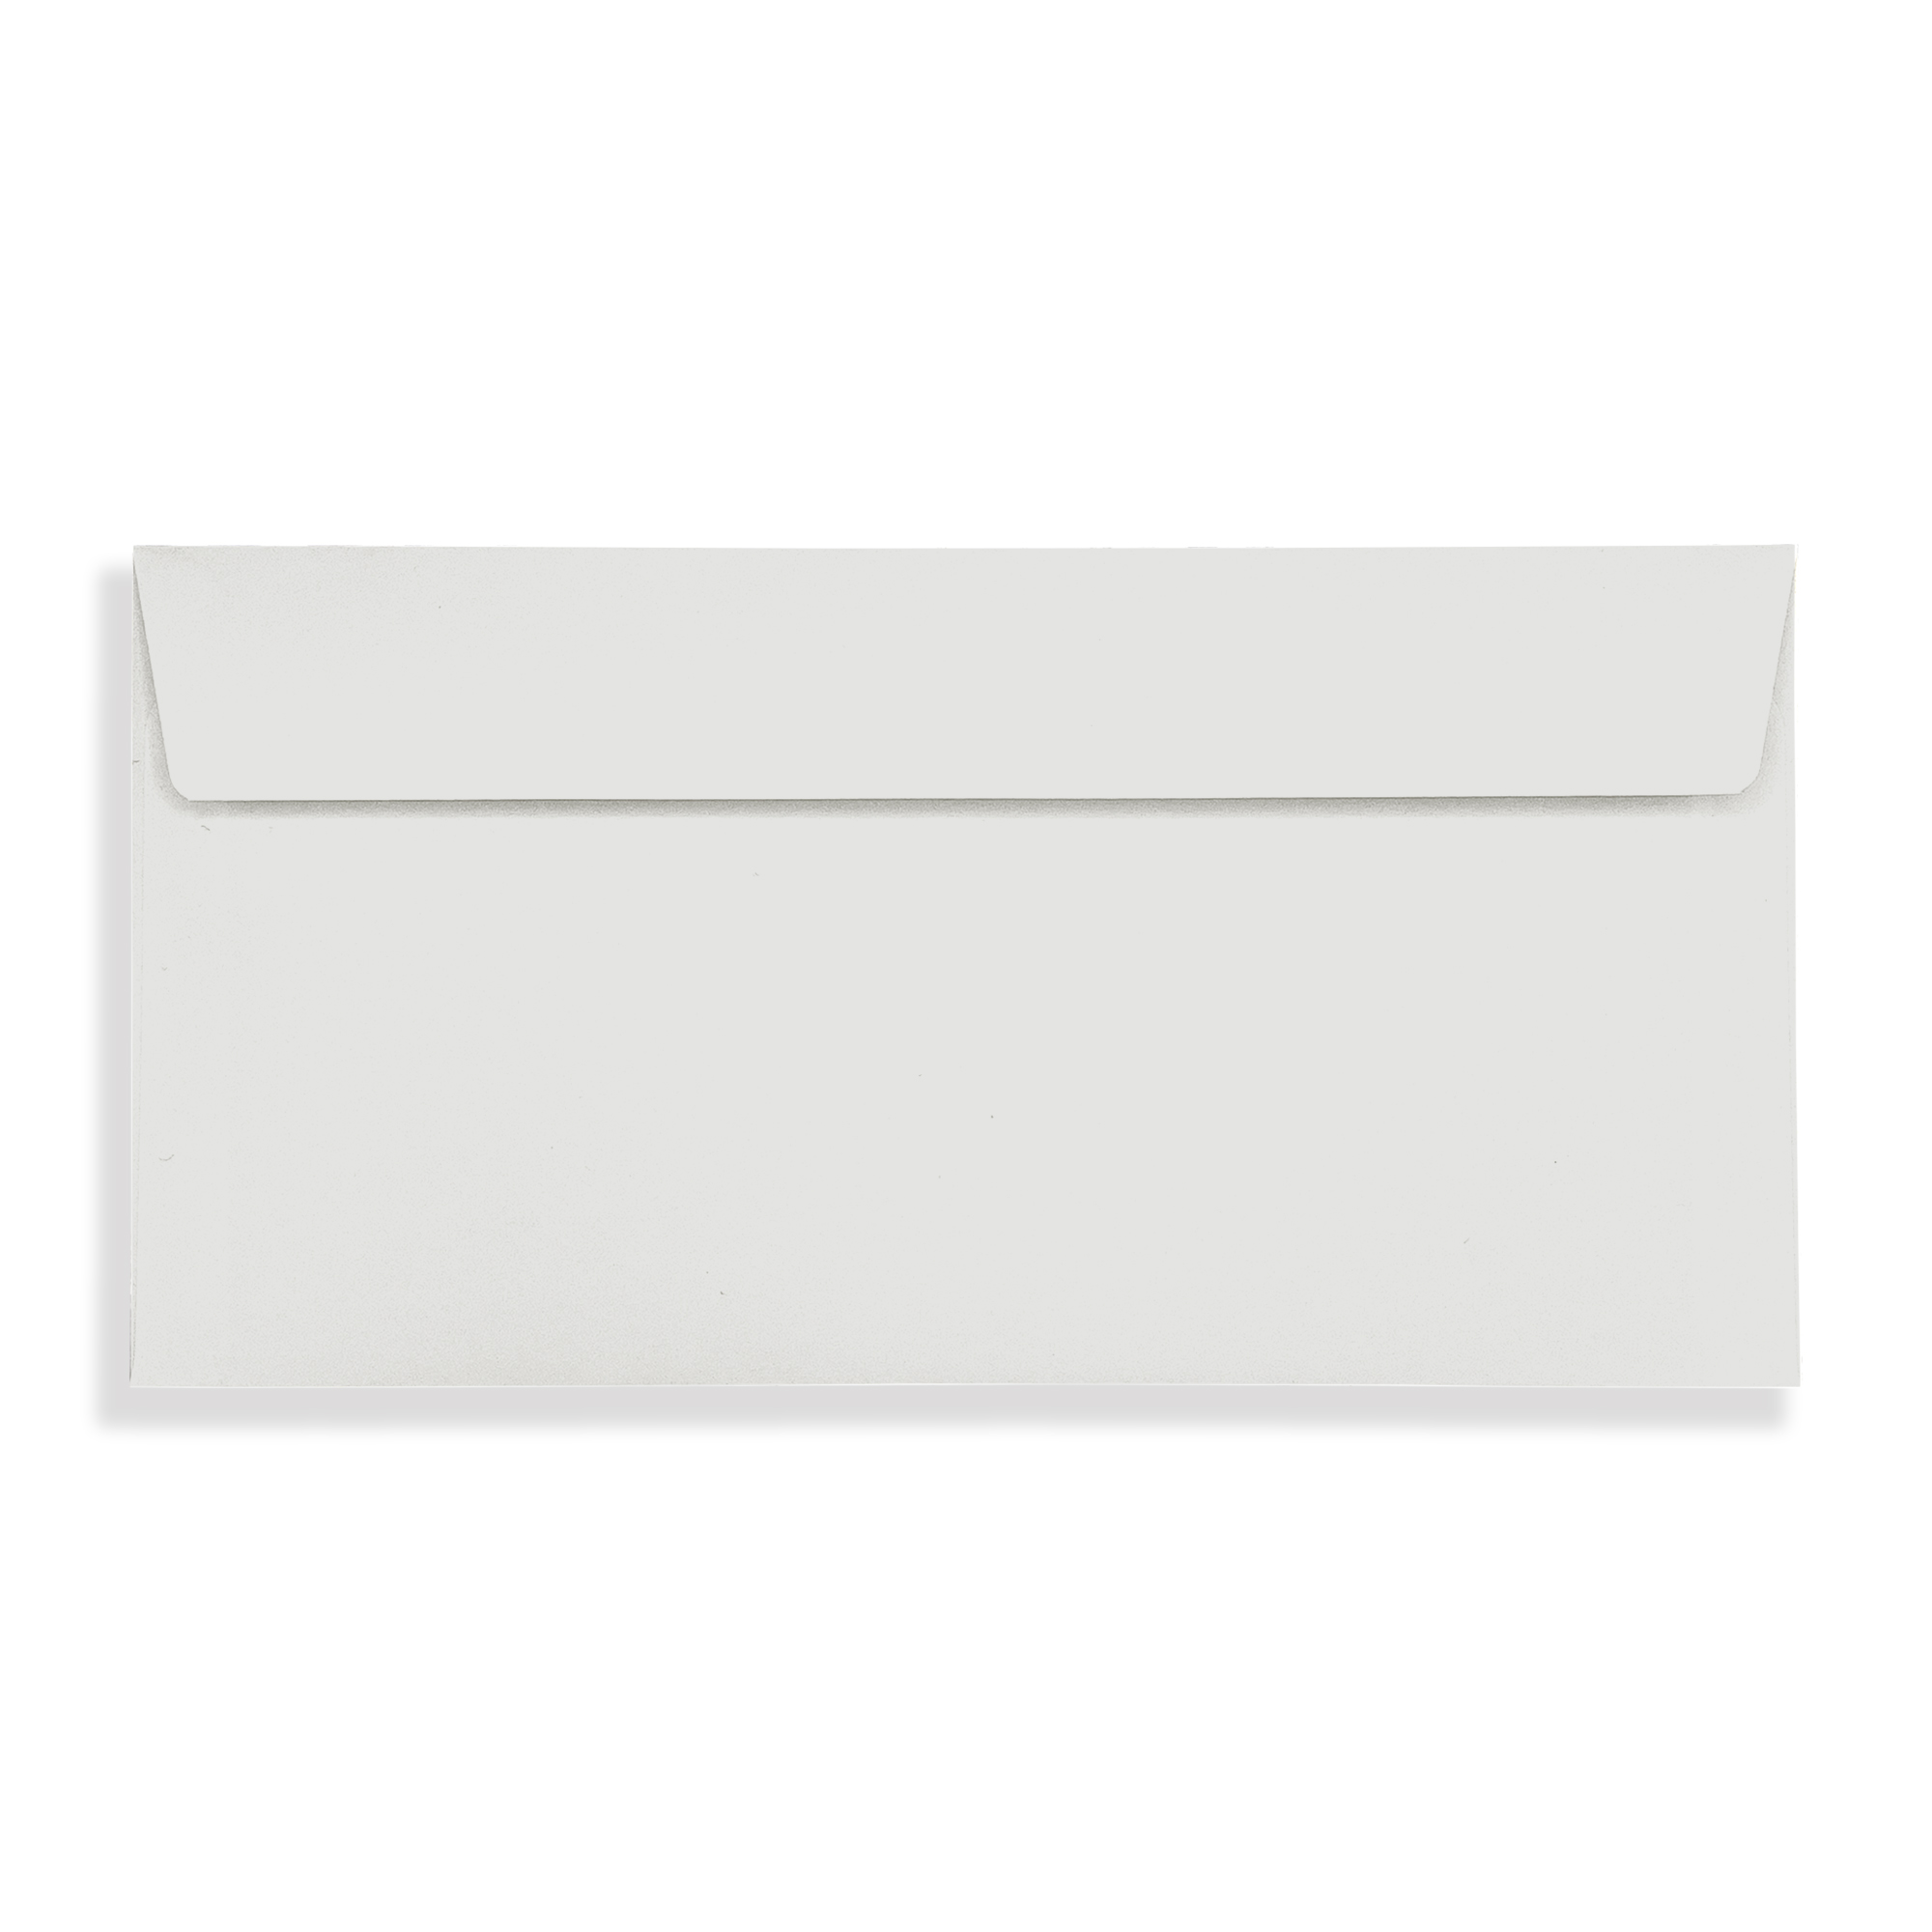 French Grey DL Peel and Seal Wallet Envelopes 120gsm Flap Closed